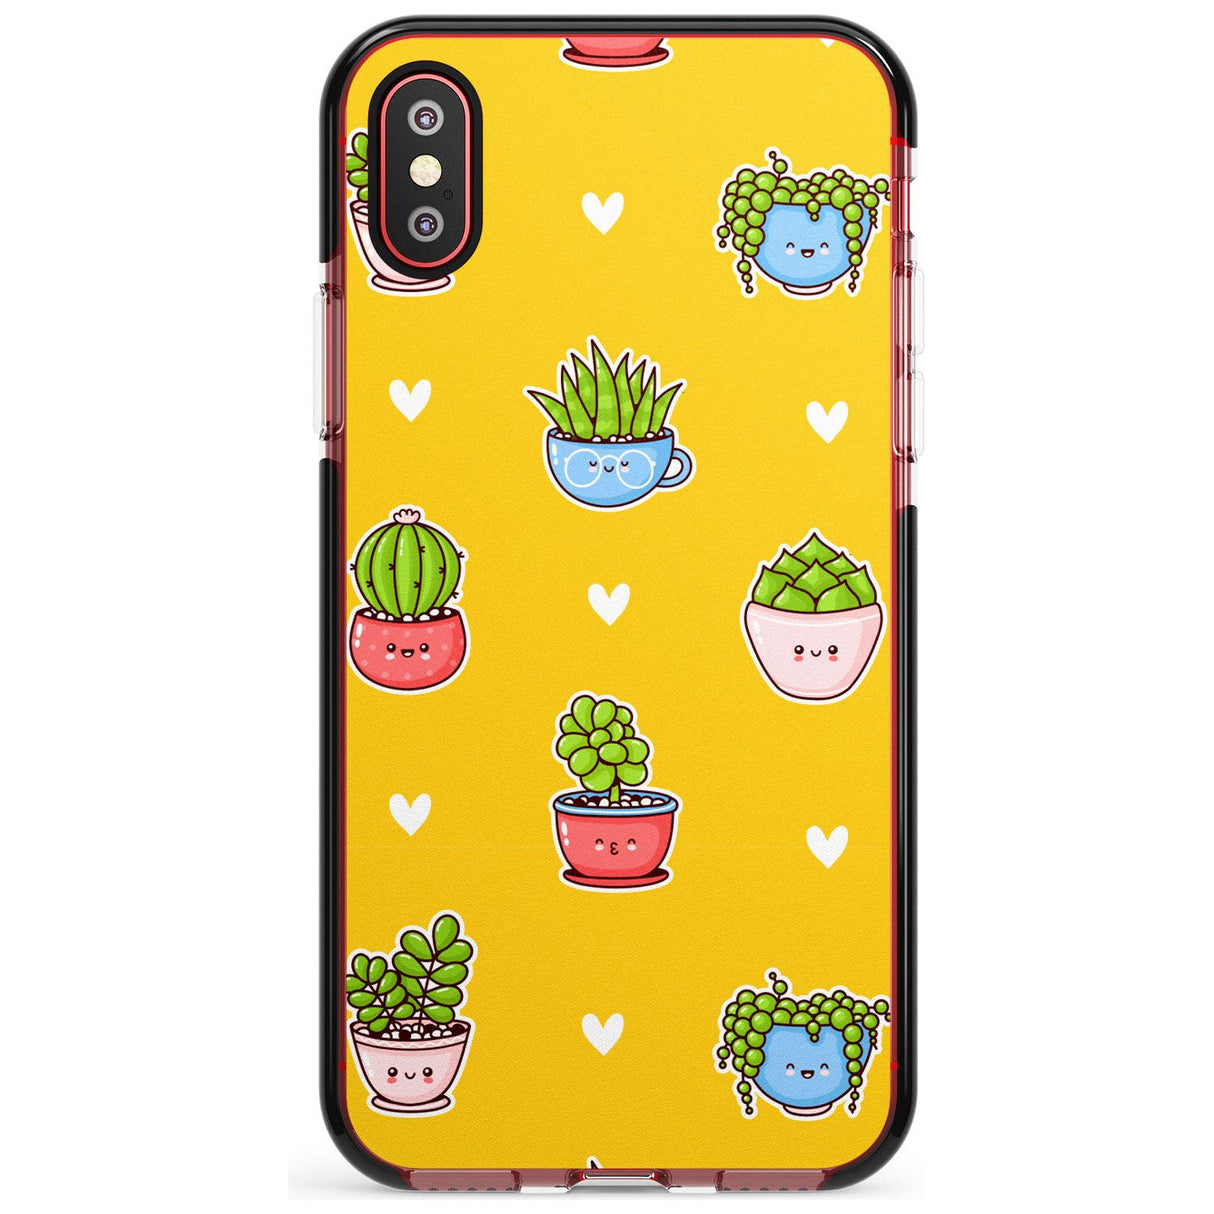 Plant Faces Kawaii Pattern Black Impact Phone Case for iPhone X XS Max XR